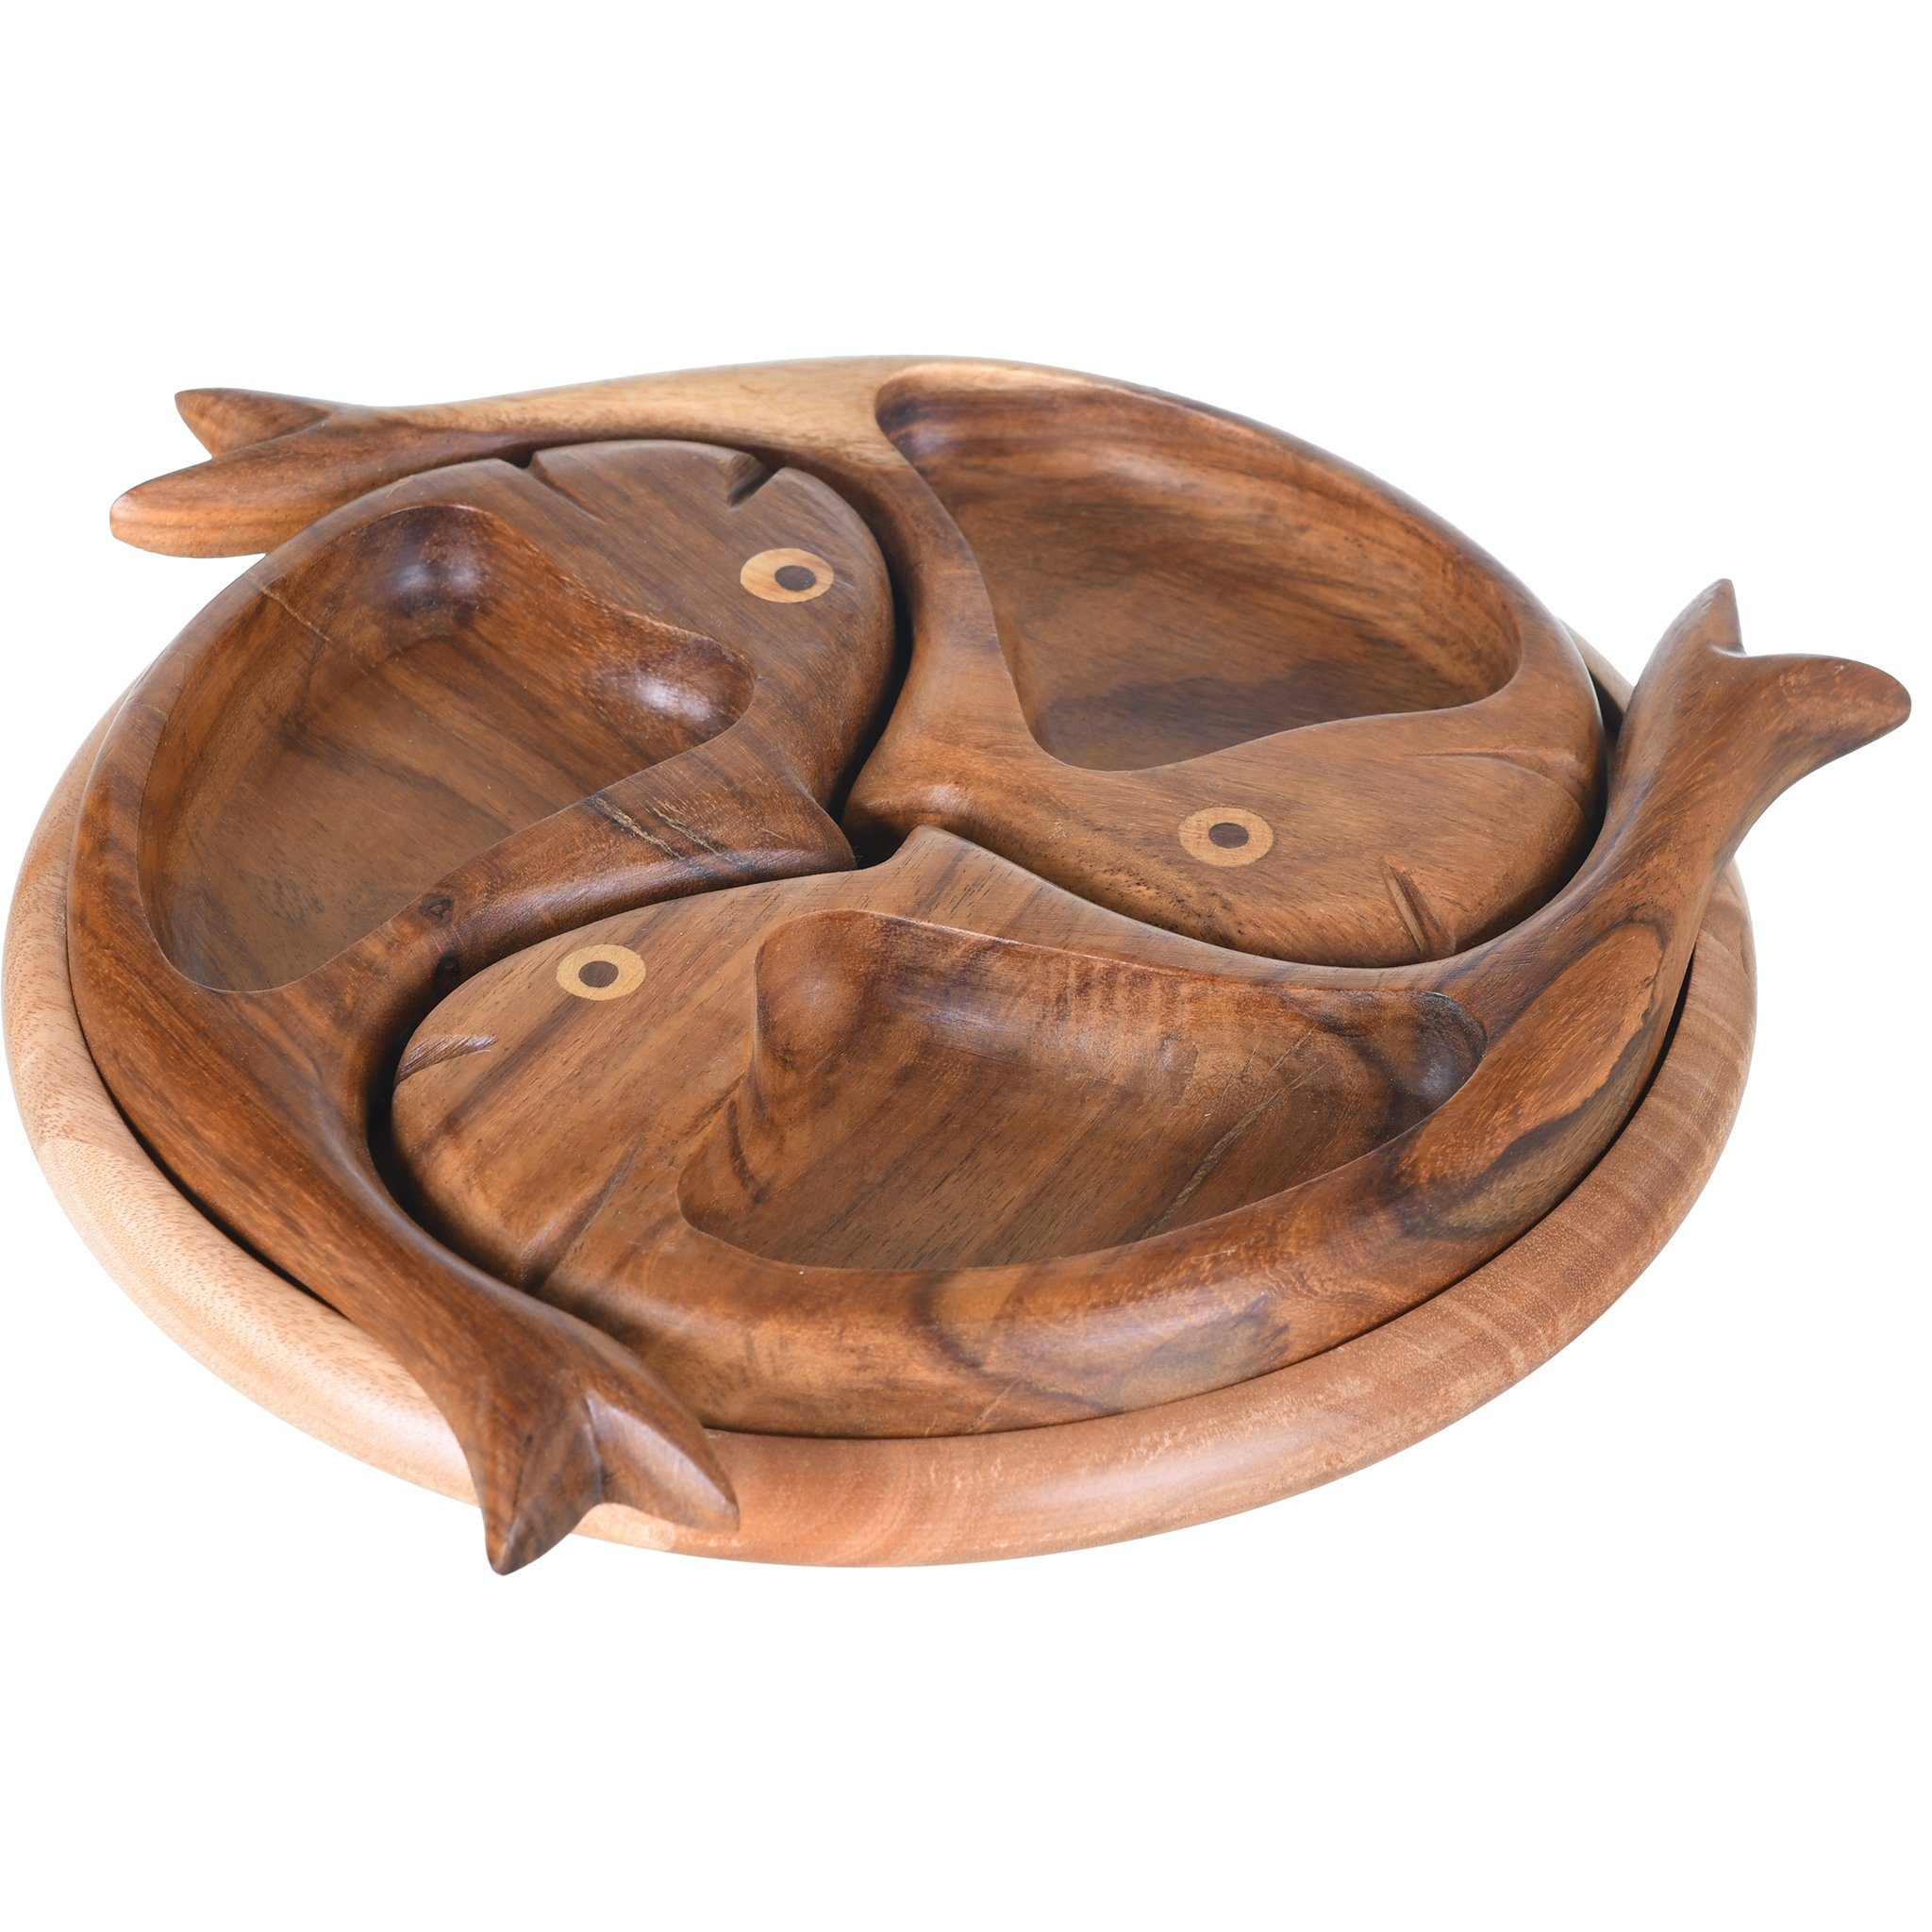 Large Fish Shaped Wooden Hors d'oeuvre 3 Parts - 25cm - 5900011